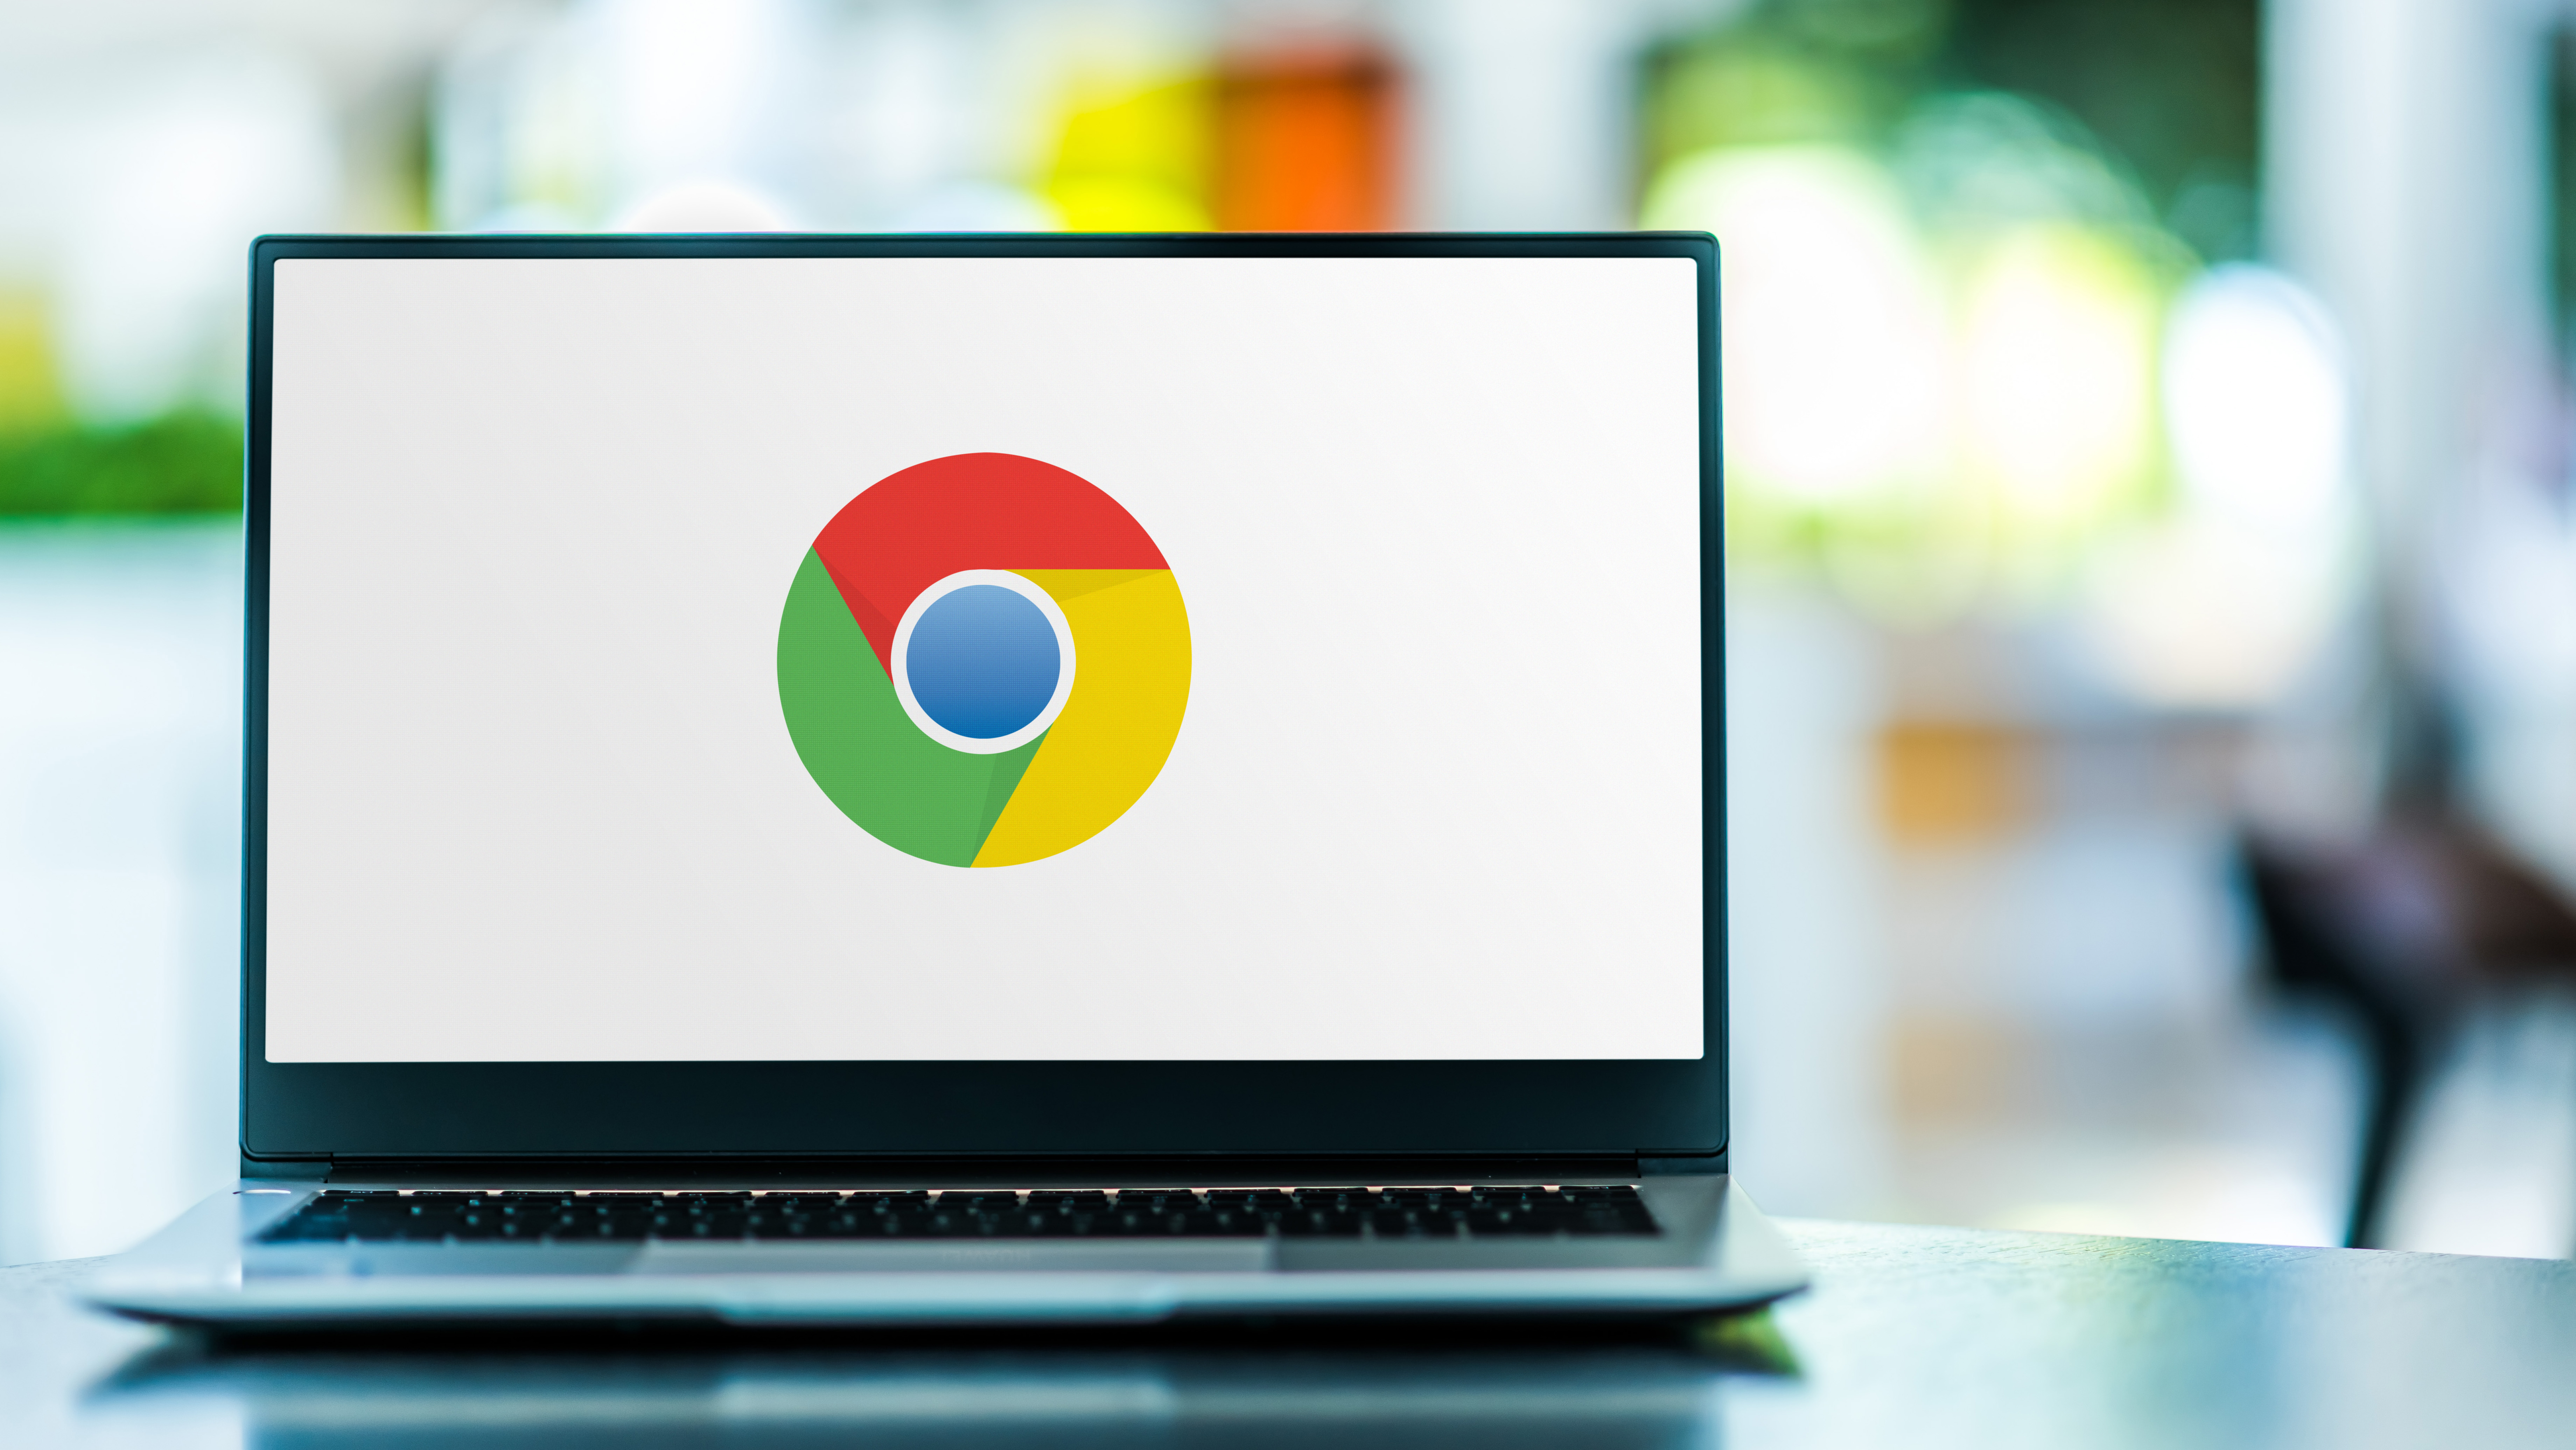 How To Install Chrome OS On Your Computer